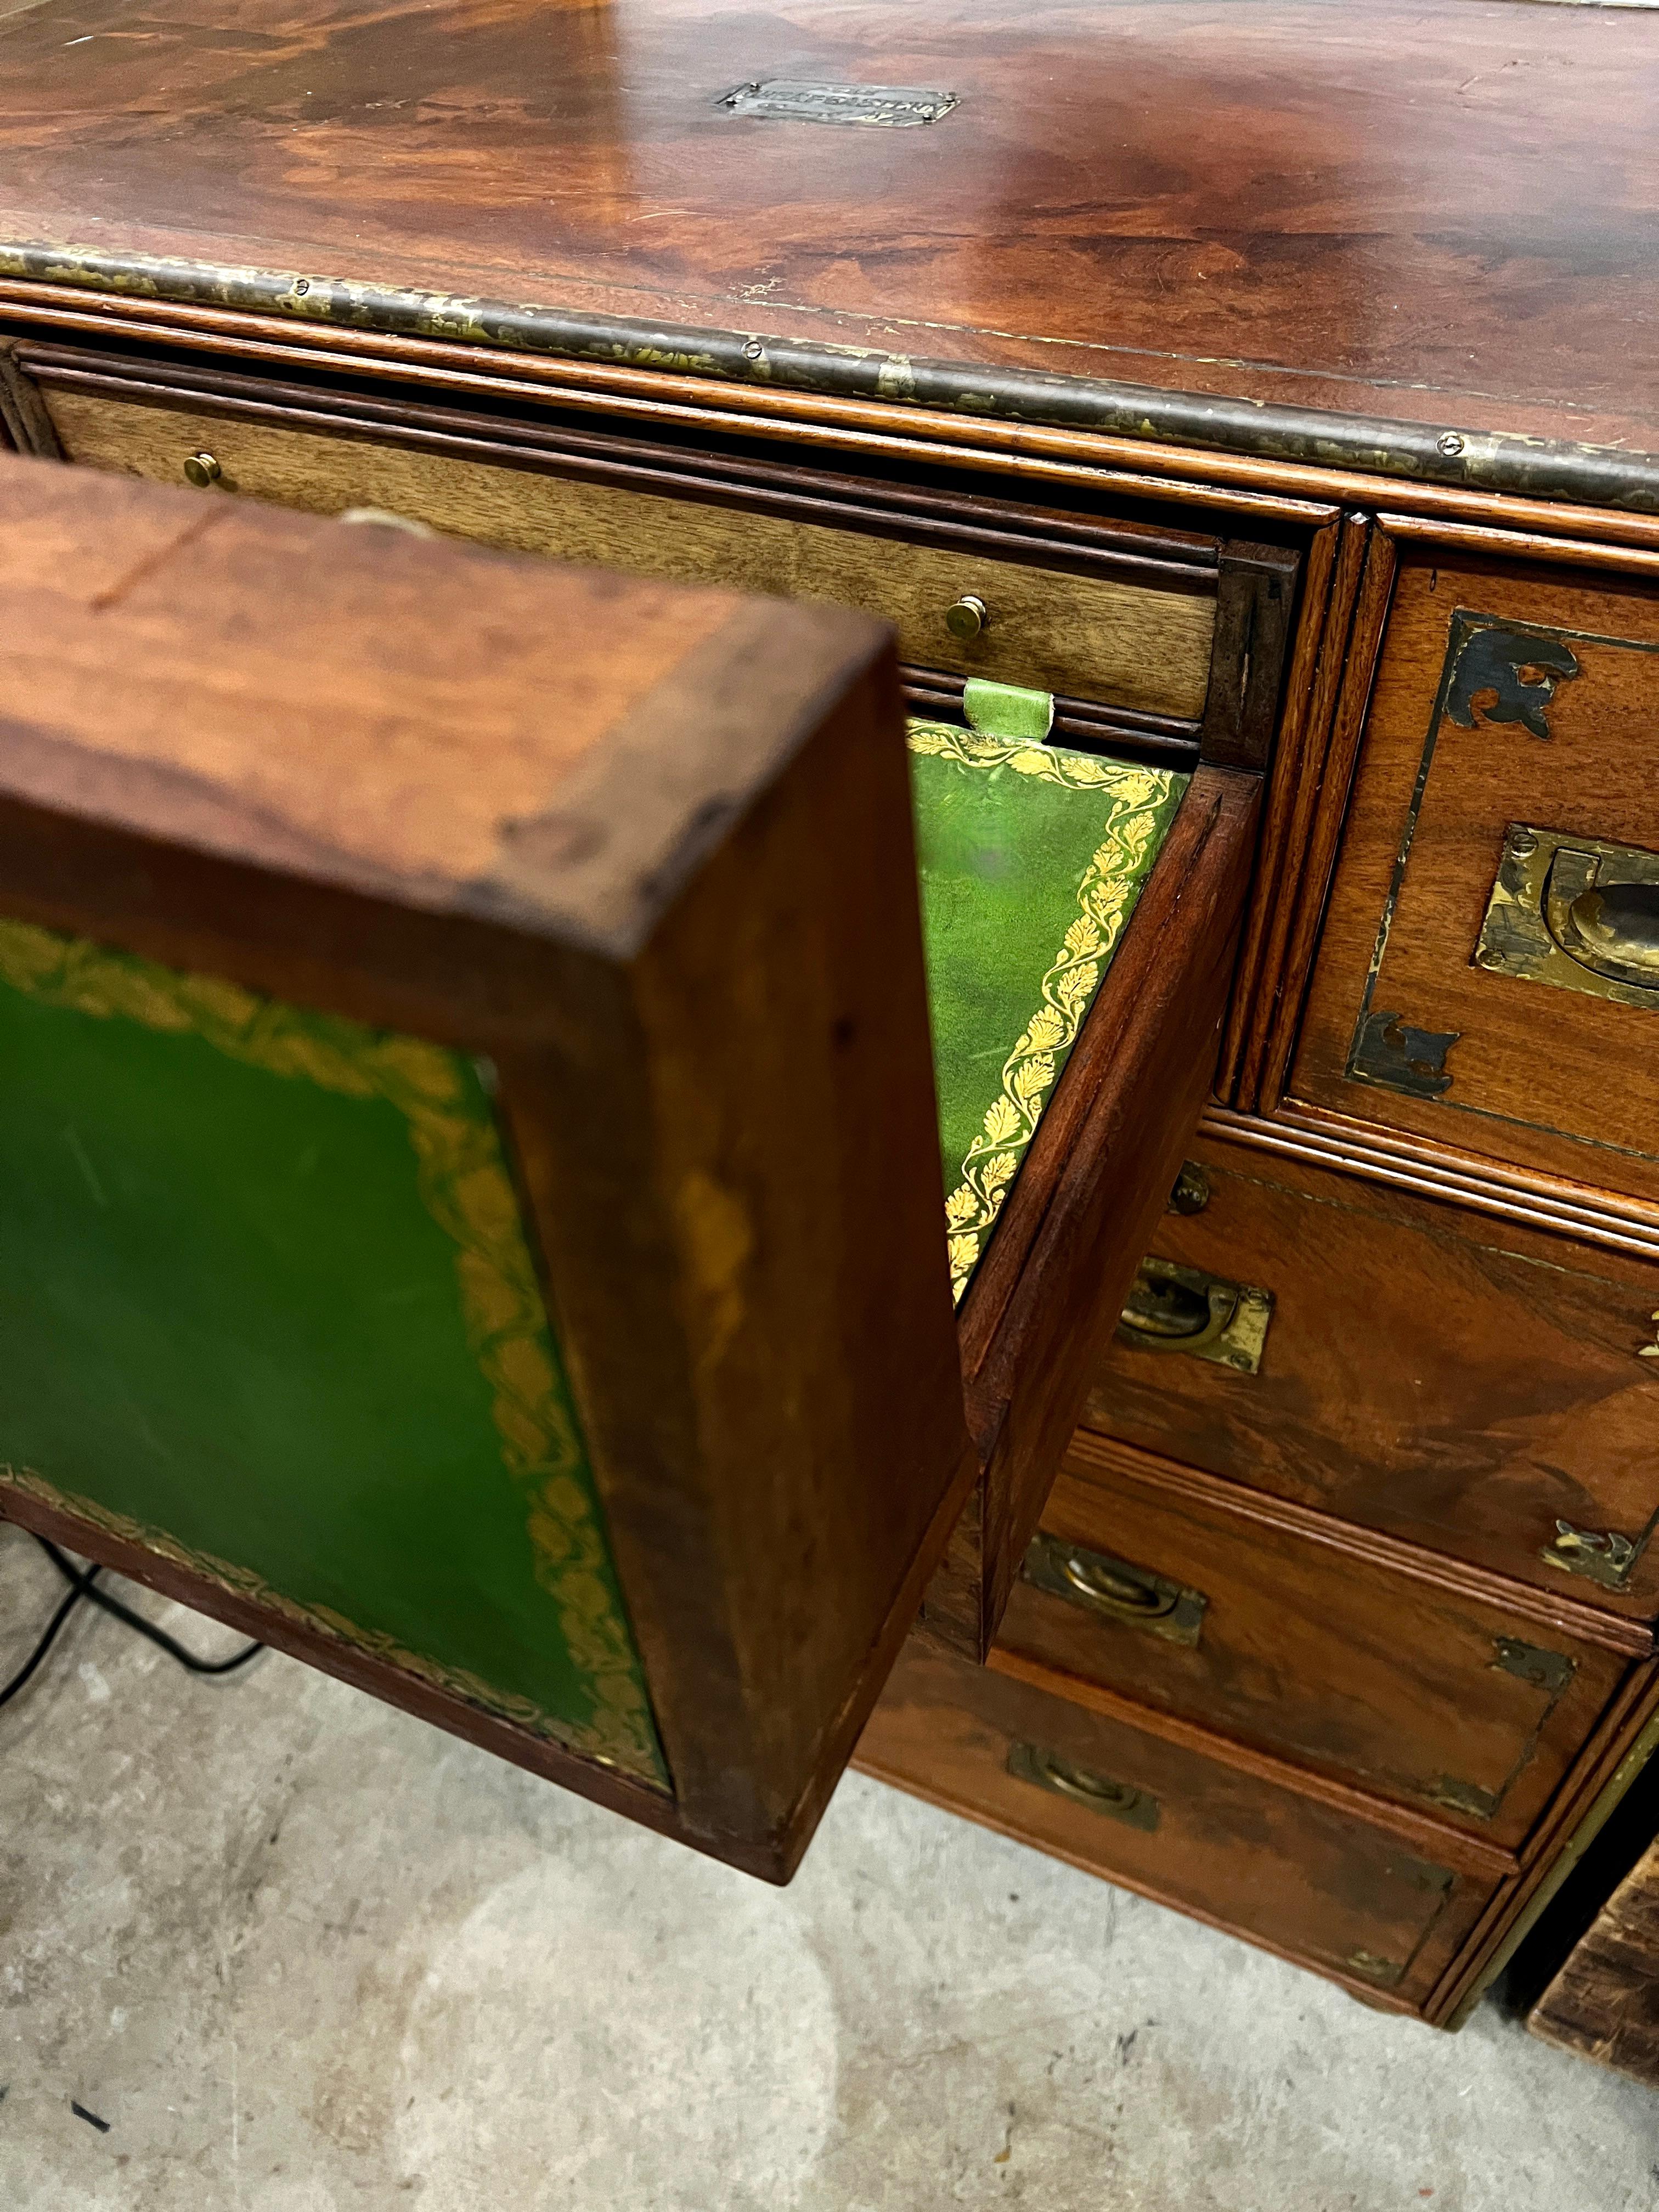 Anglo Raj Regency Campaign Chest with Desk Trimmed in Brass Banding Accents 1811 For Sale 4